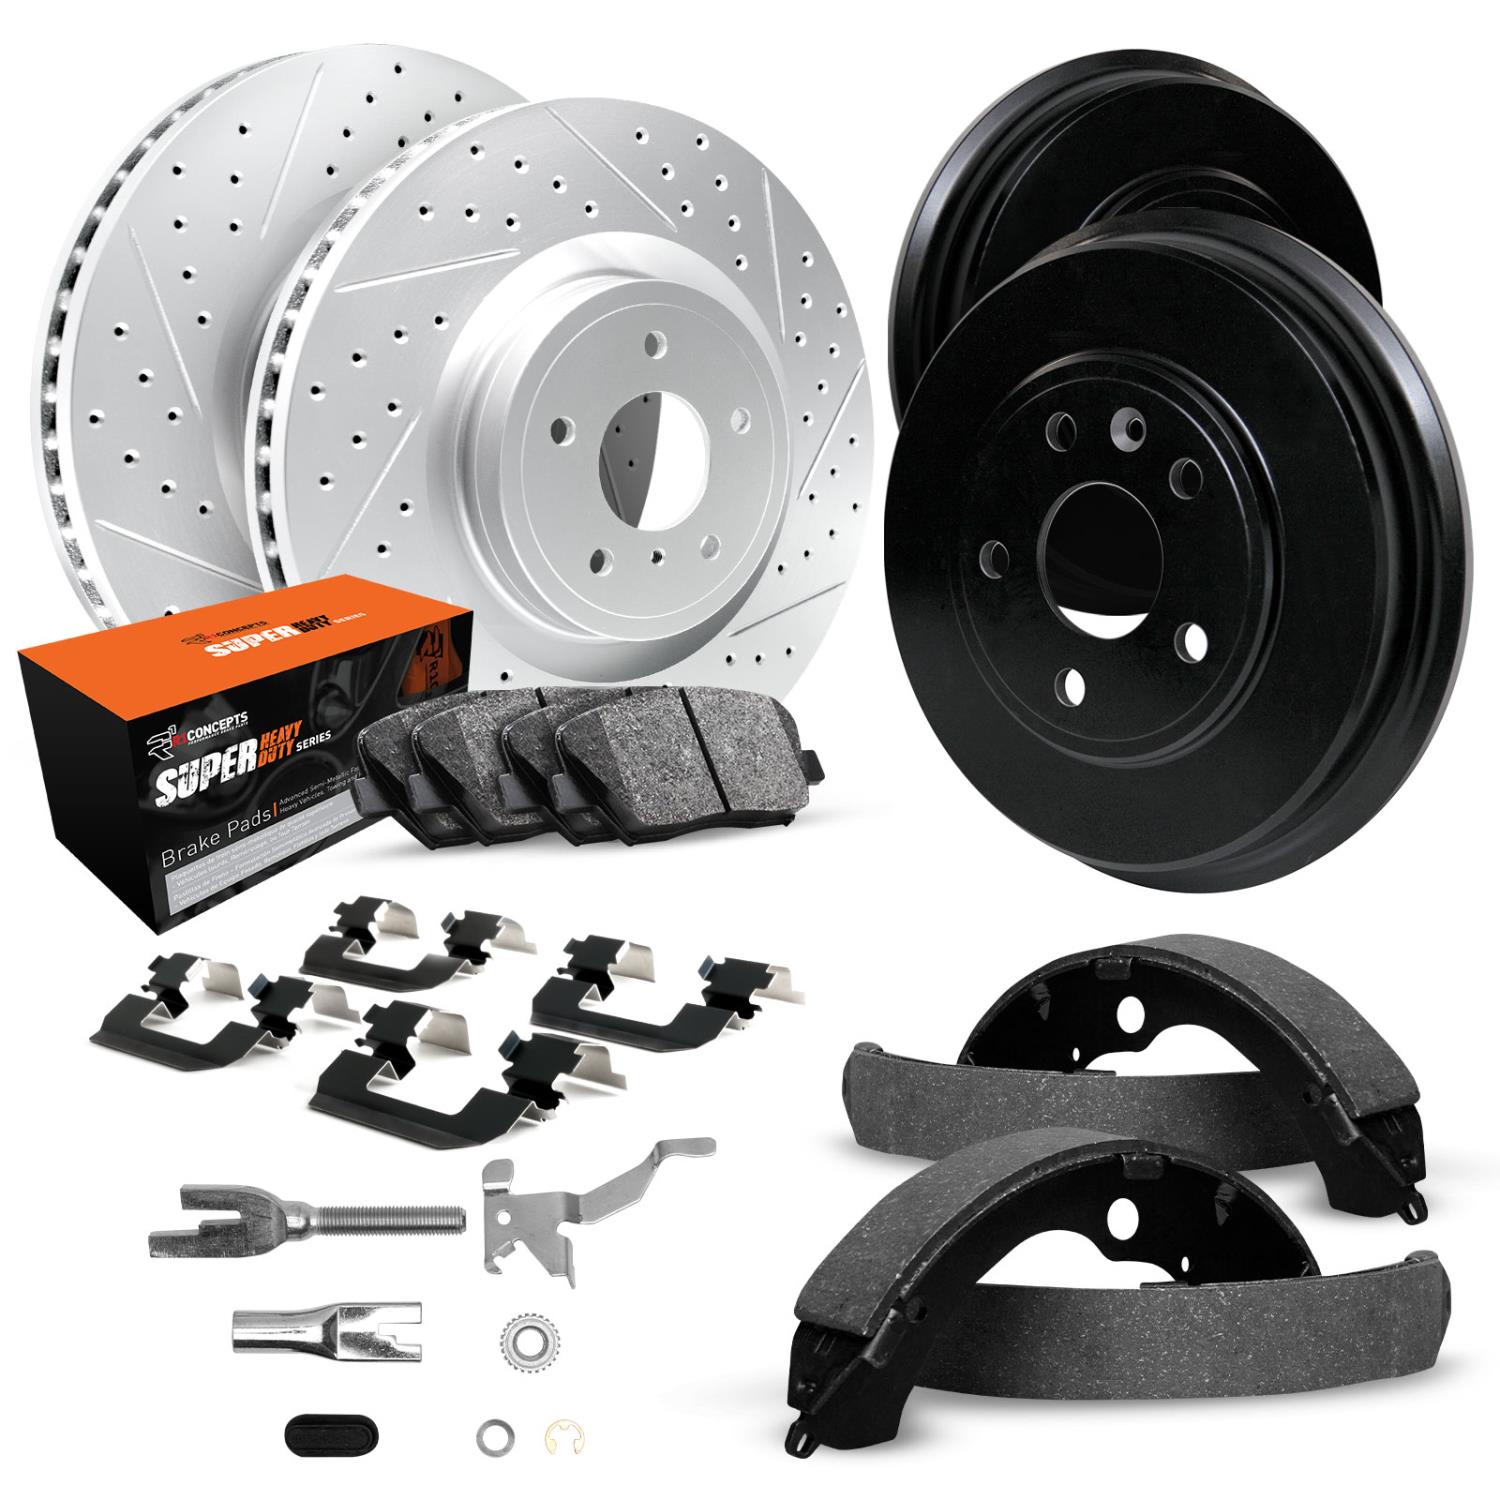 GEO-Carbon Drilled/Slotted Rotors/Drums w/Super-Duty Pads/Shoes/Hardware/Adjusters, 1988-2000 GM, Position: Front/Rear